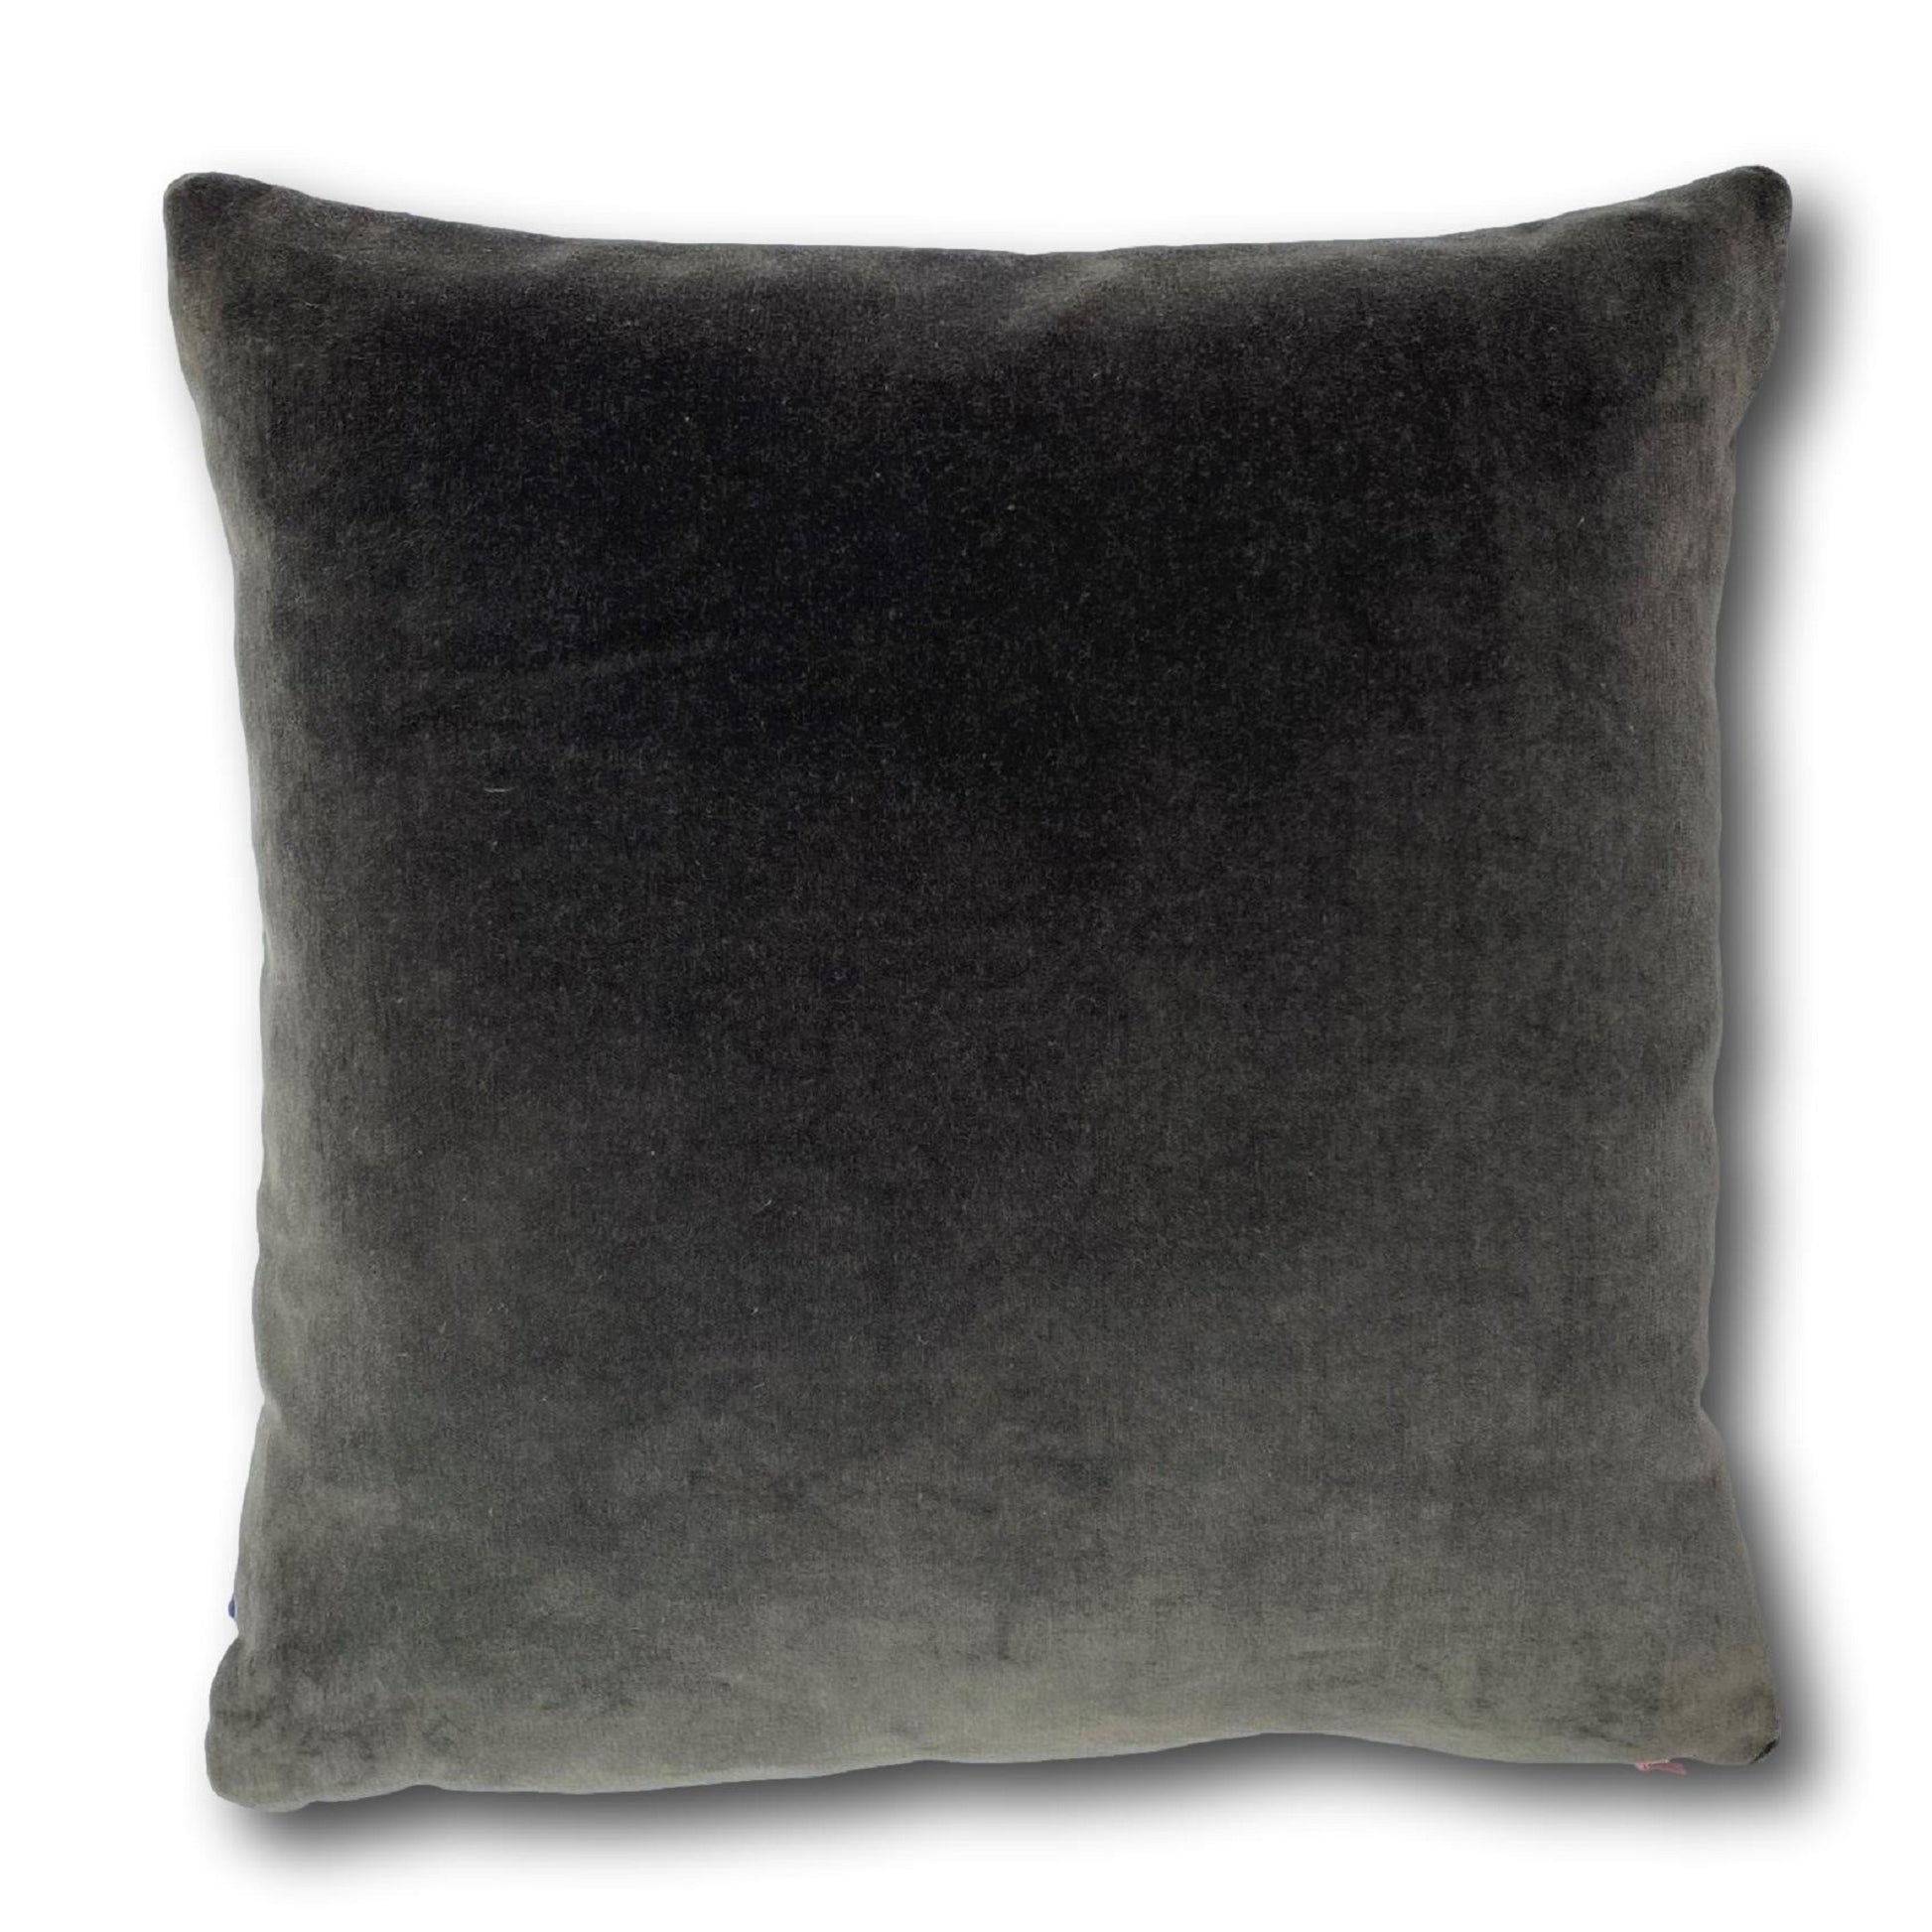 grey and pink cushion luxe 39